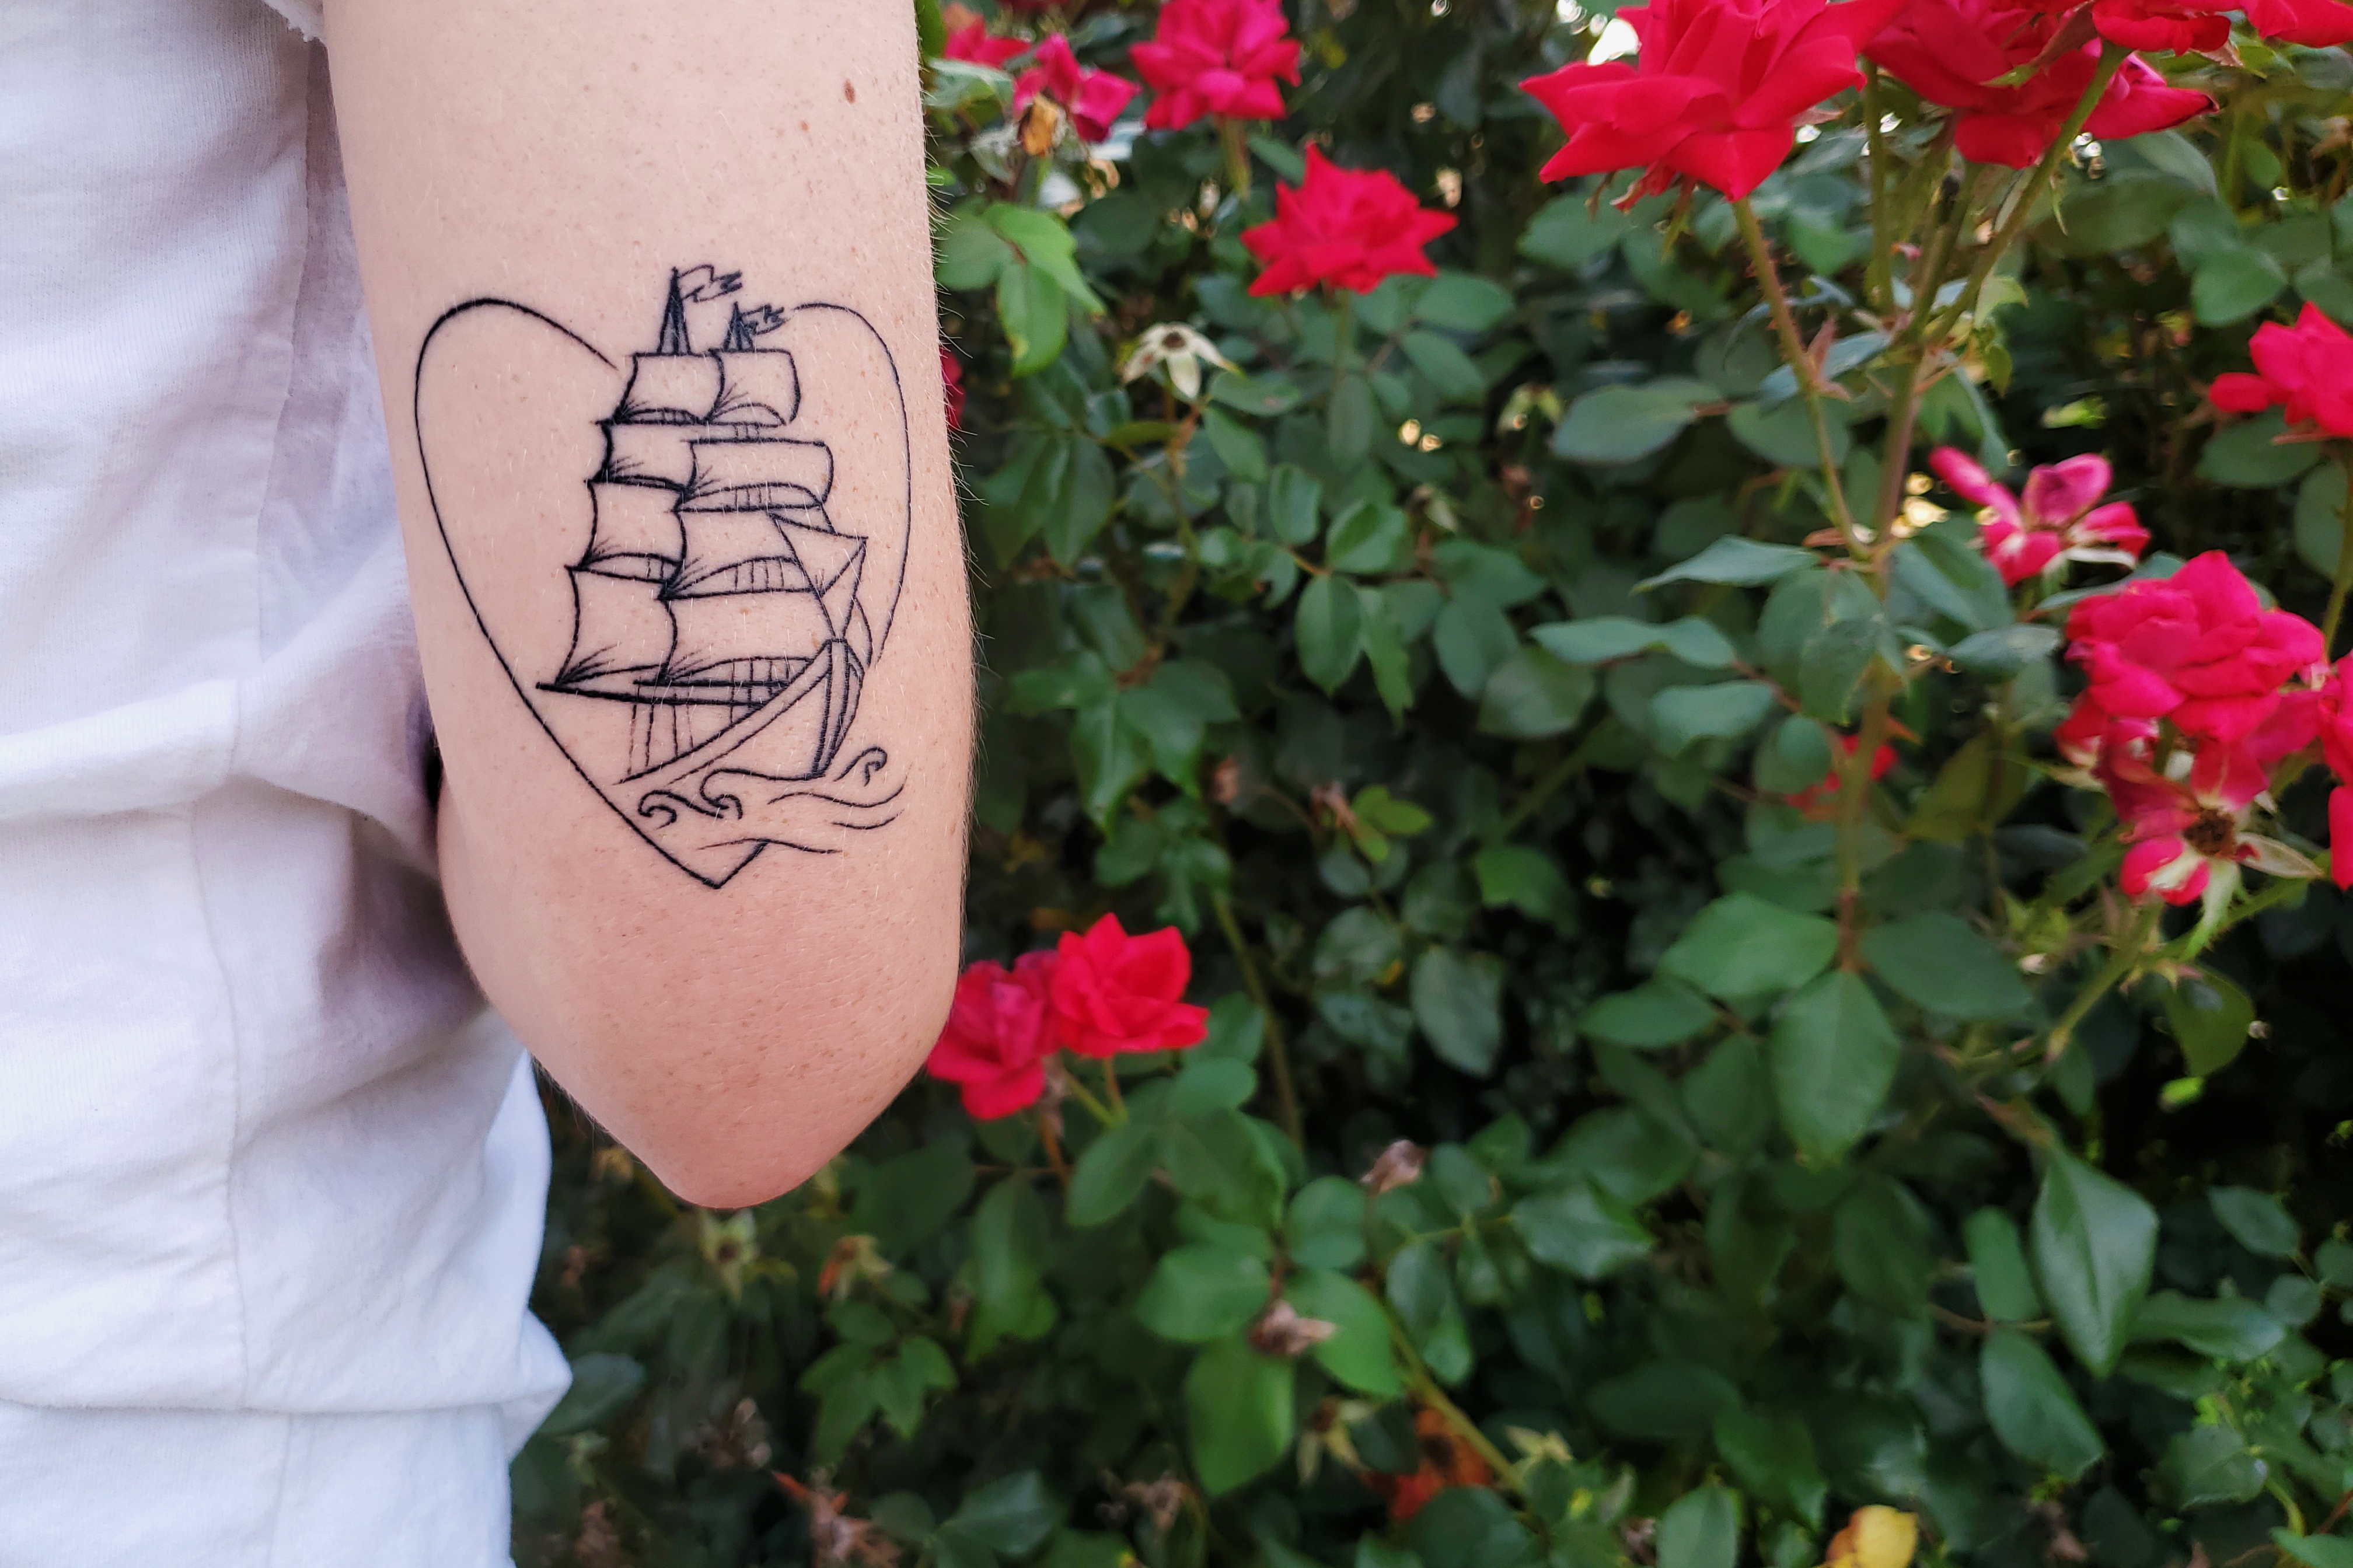 A tattoo on the back of an arm above the elbow of a large ship coming out of a heart.